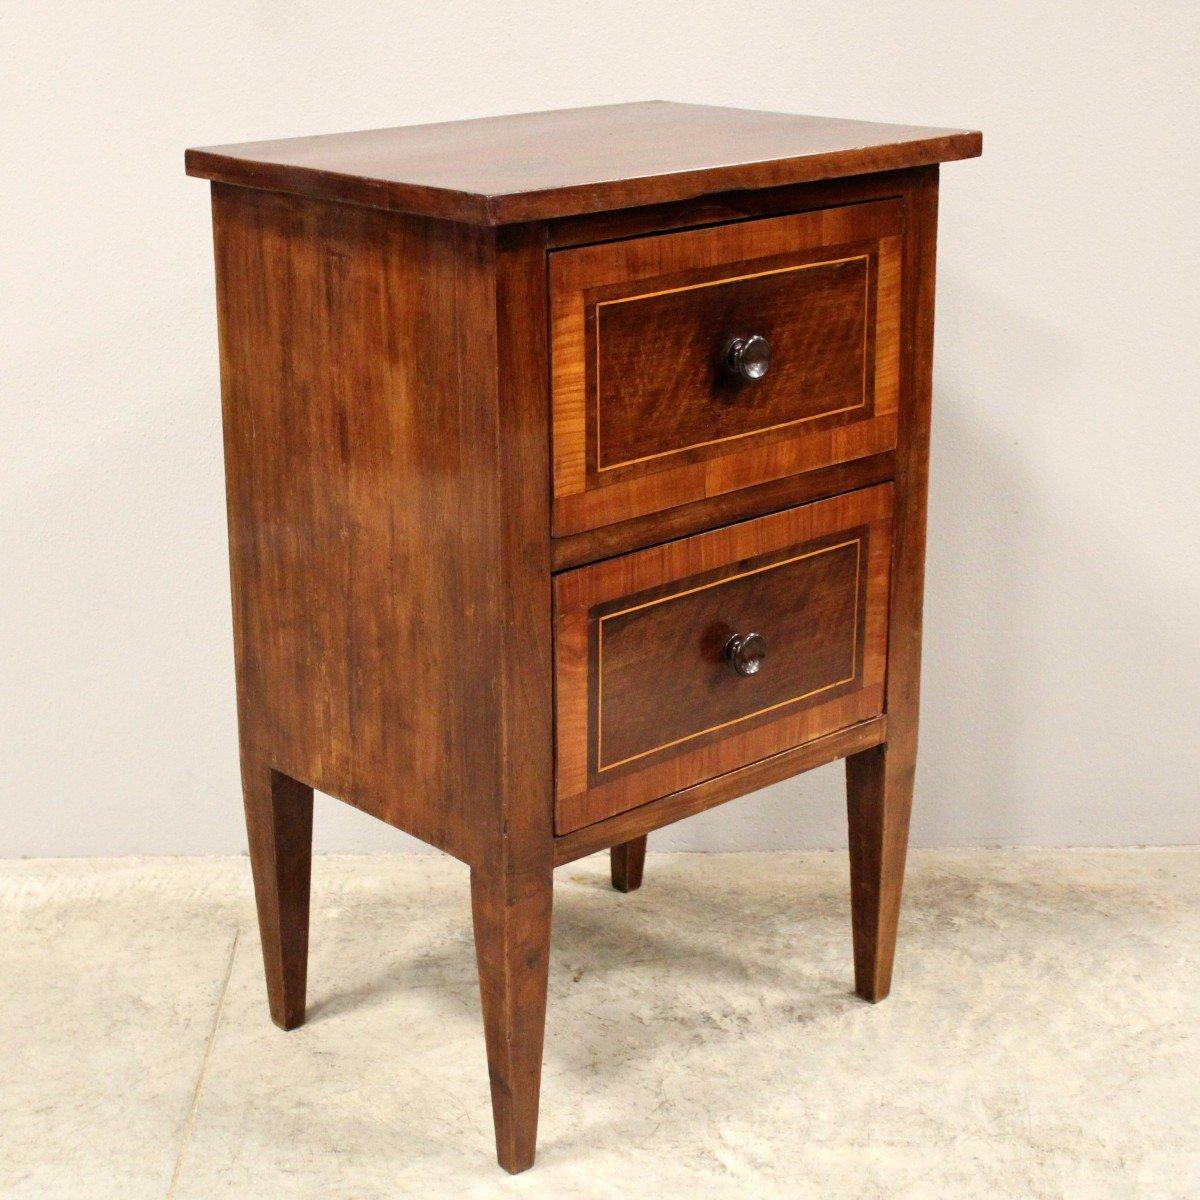 18th Century and Earlier 18th Century Italian Walnut Two Toned Bedside Table with Two Drawers